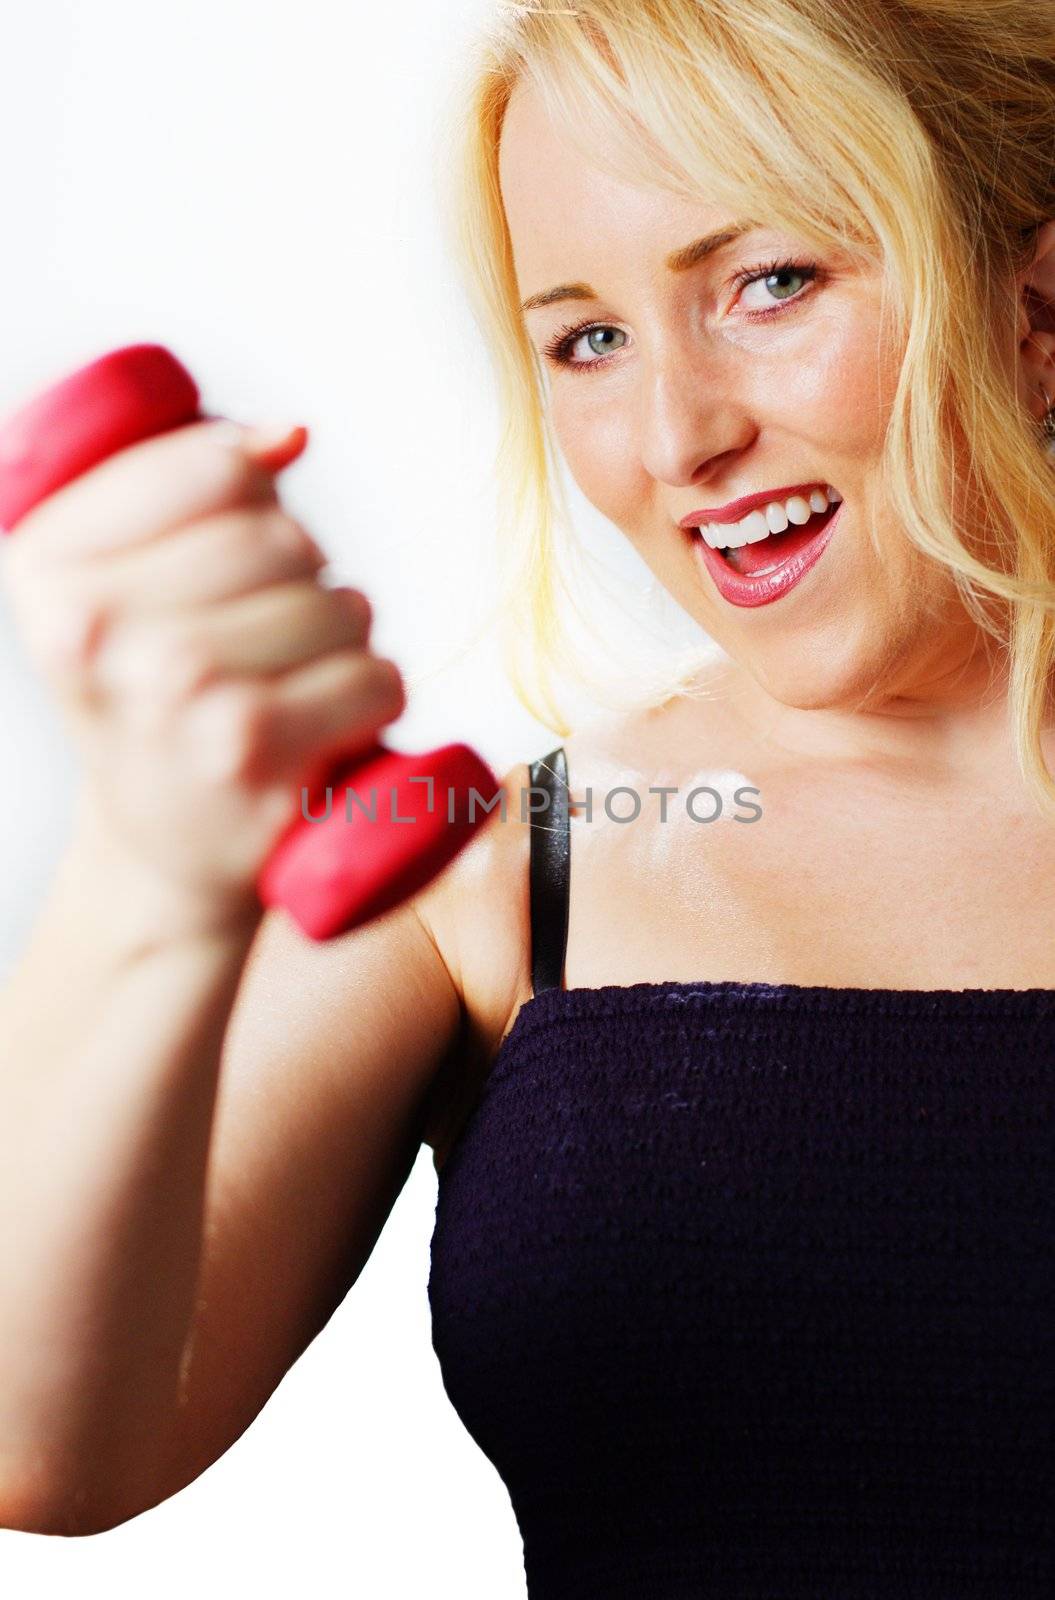 Attractive young woman excercising against a white background.